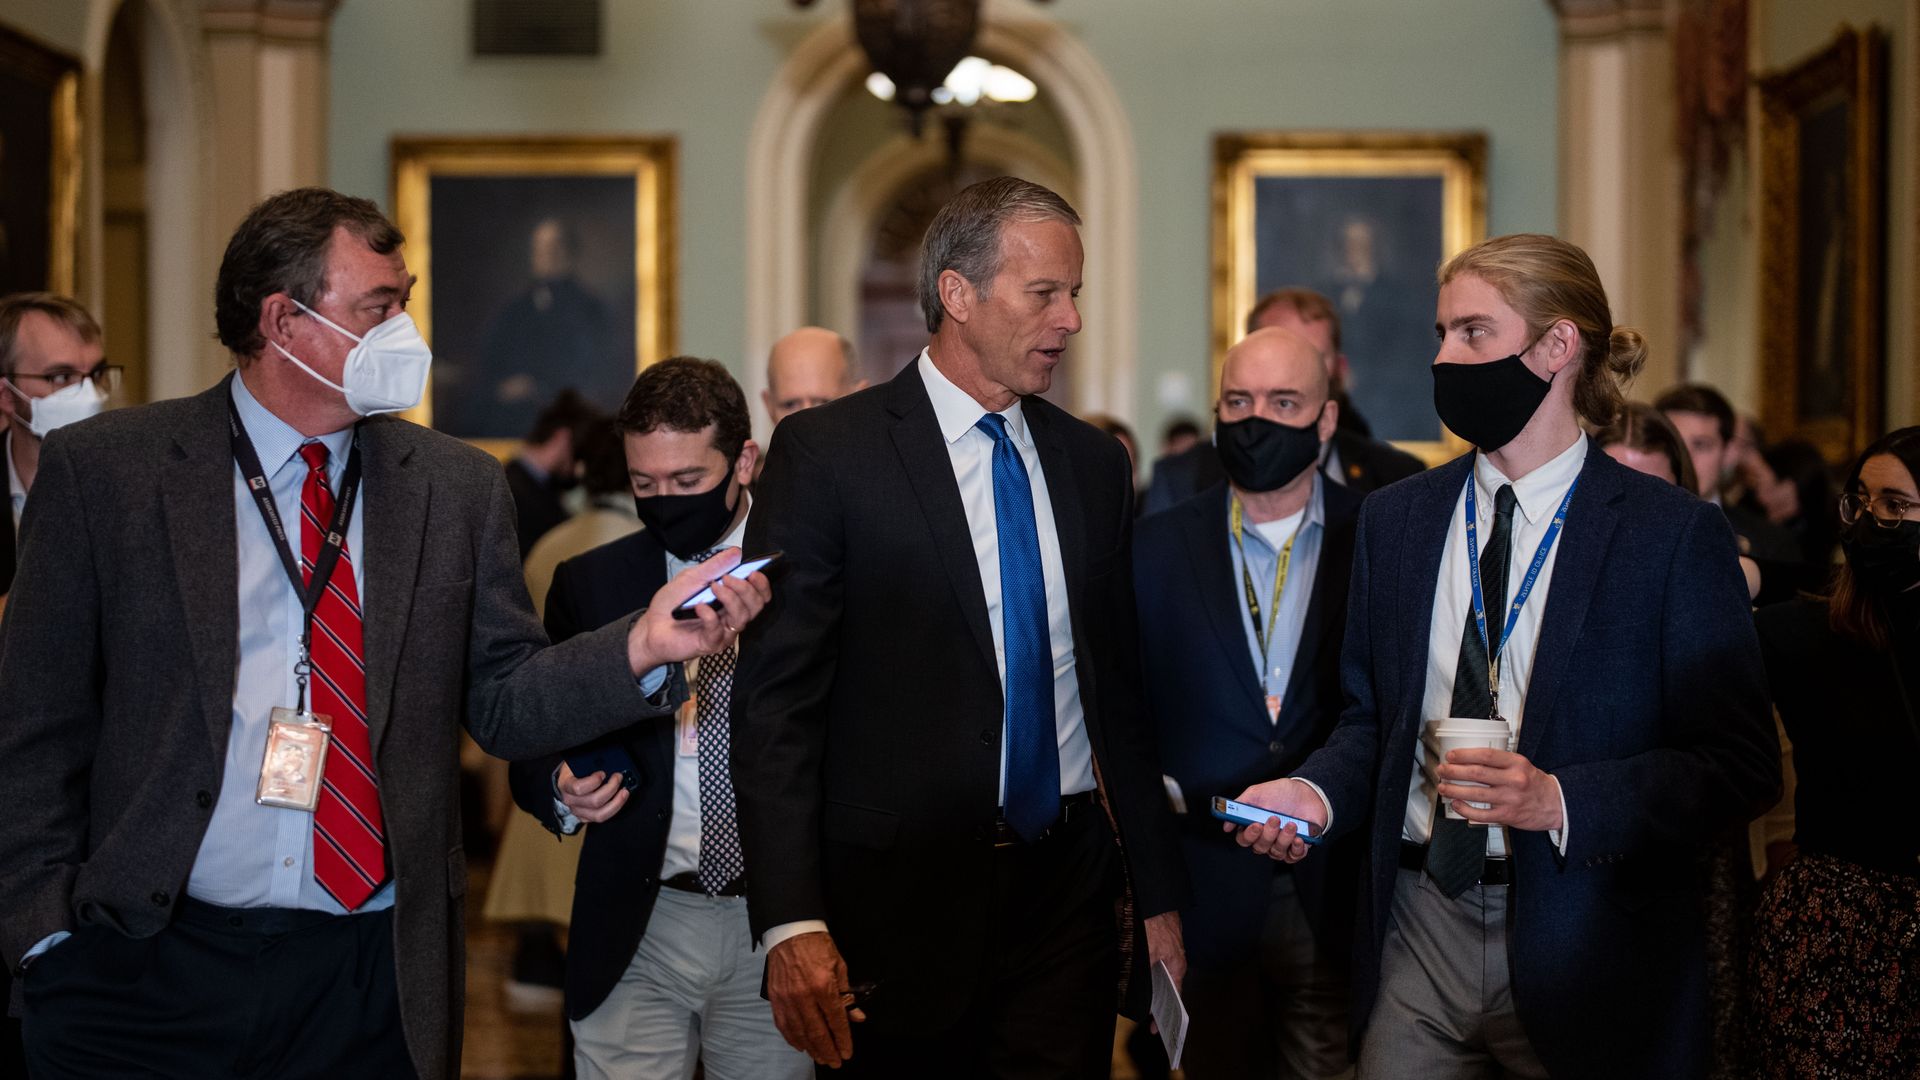 Senate Minority Whip John Thune is seen speaking with reporters before Tuesday's Republican Party lunch in the Capitol.